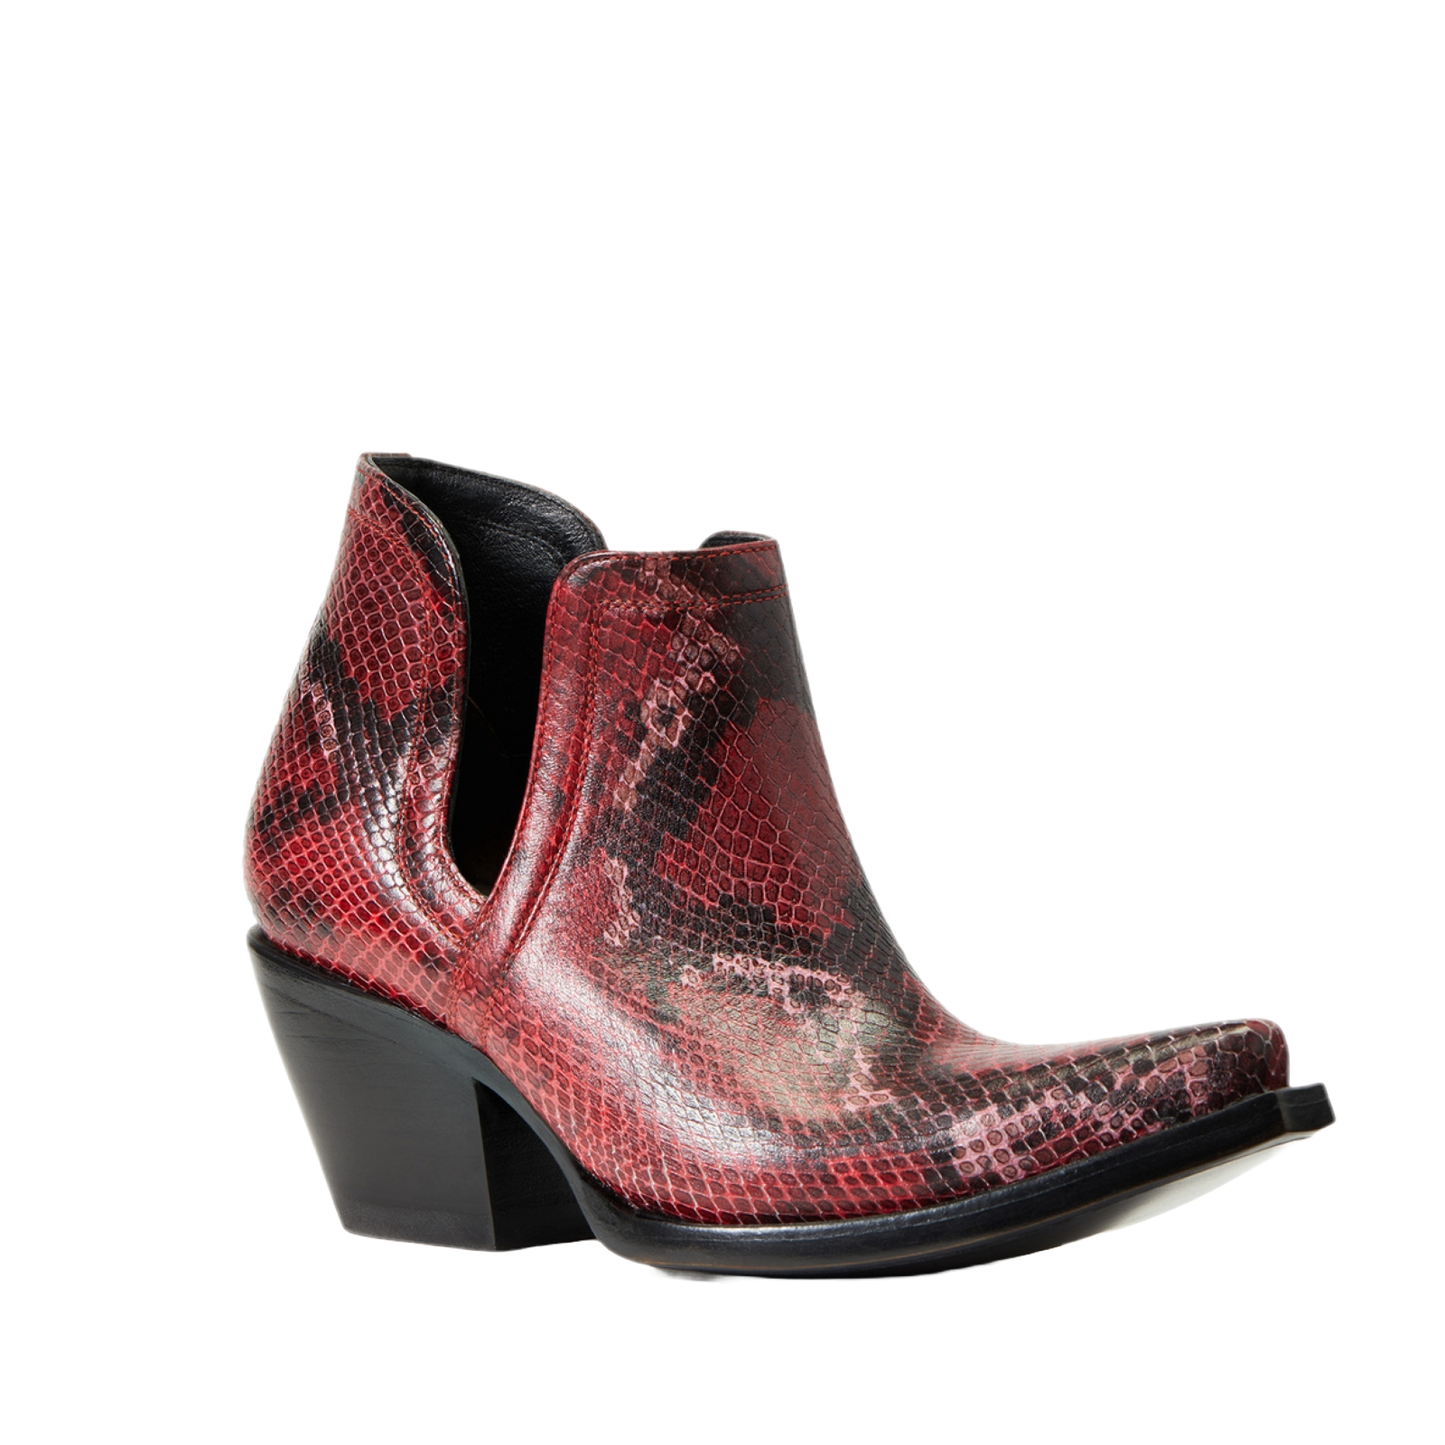 Ariat Ladies Dixon Snake Print Red Western Boots 10041030